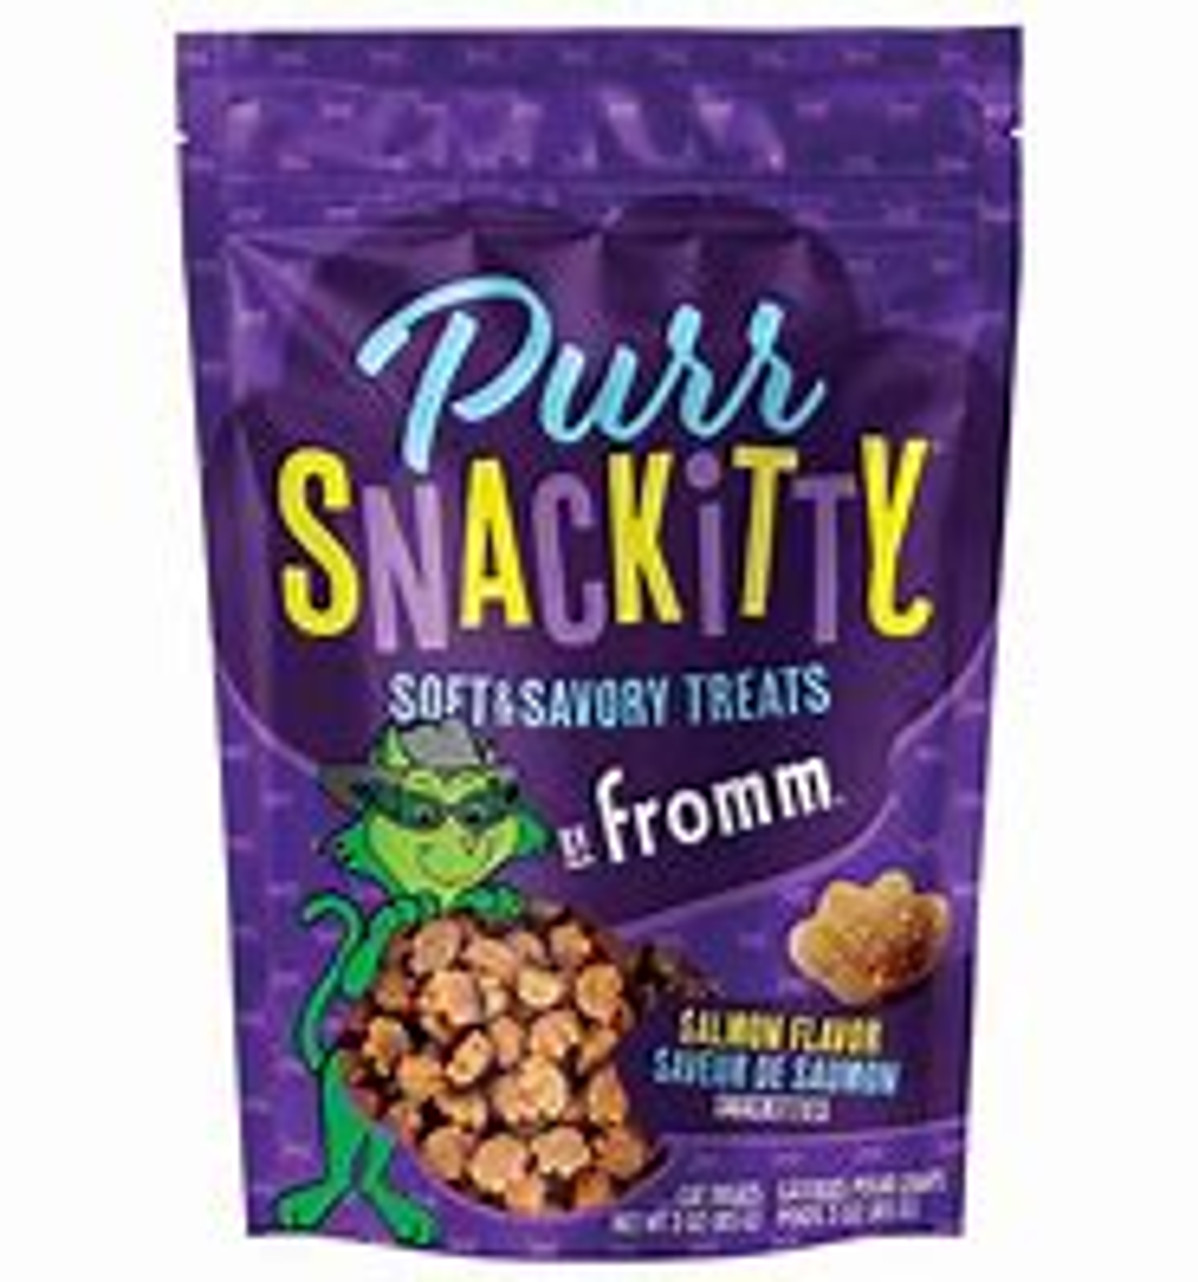 Fromm Cat Treat Purrsnackitt Salmon 3 oz
SALMON FLAVOR SNACKITTIES
Made with real salmon, these bite-sized treats are moist, tender, and delicious.

Features: 

Soft & Savory Texture
Only 2 Calories per Treat
Suitable for All Cat Breeds & Ages 
Wholesome and delicious food that is carefully crafted for cats of all breeds and ages, from Maine Coons to Munchkins, kittens to seniors, and every breed and stage in-between.

Additional Information:
Ingredients

Salmon,Chickpeas,Peas,Tapioca Starch,Vegetable Glycerin,Pea Protein,Coconut Oil (preserved with mixed tocopherols),Dried Sweet Potatoes,Potatoes,Natural Flavor,Natural Hickory Smoke Flavor,Phosphoric Acid,Salt,Sorbic Acid (Preservative),Taurine.